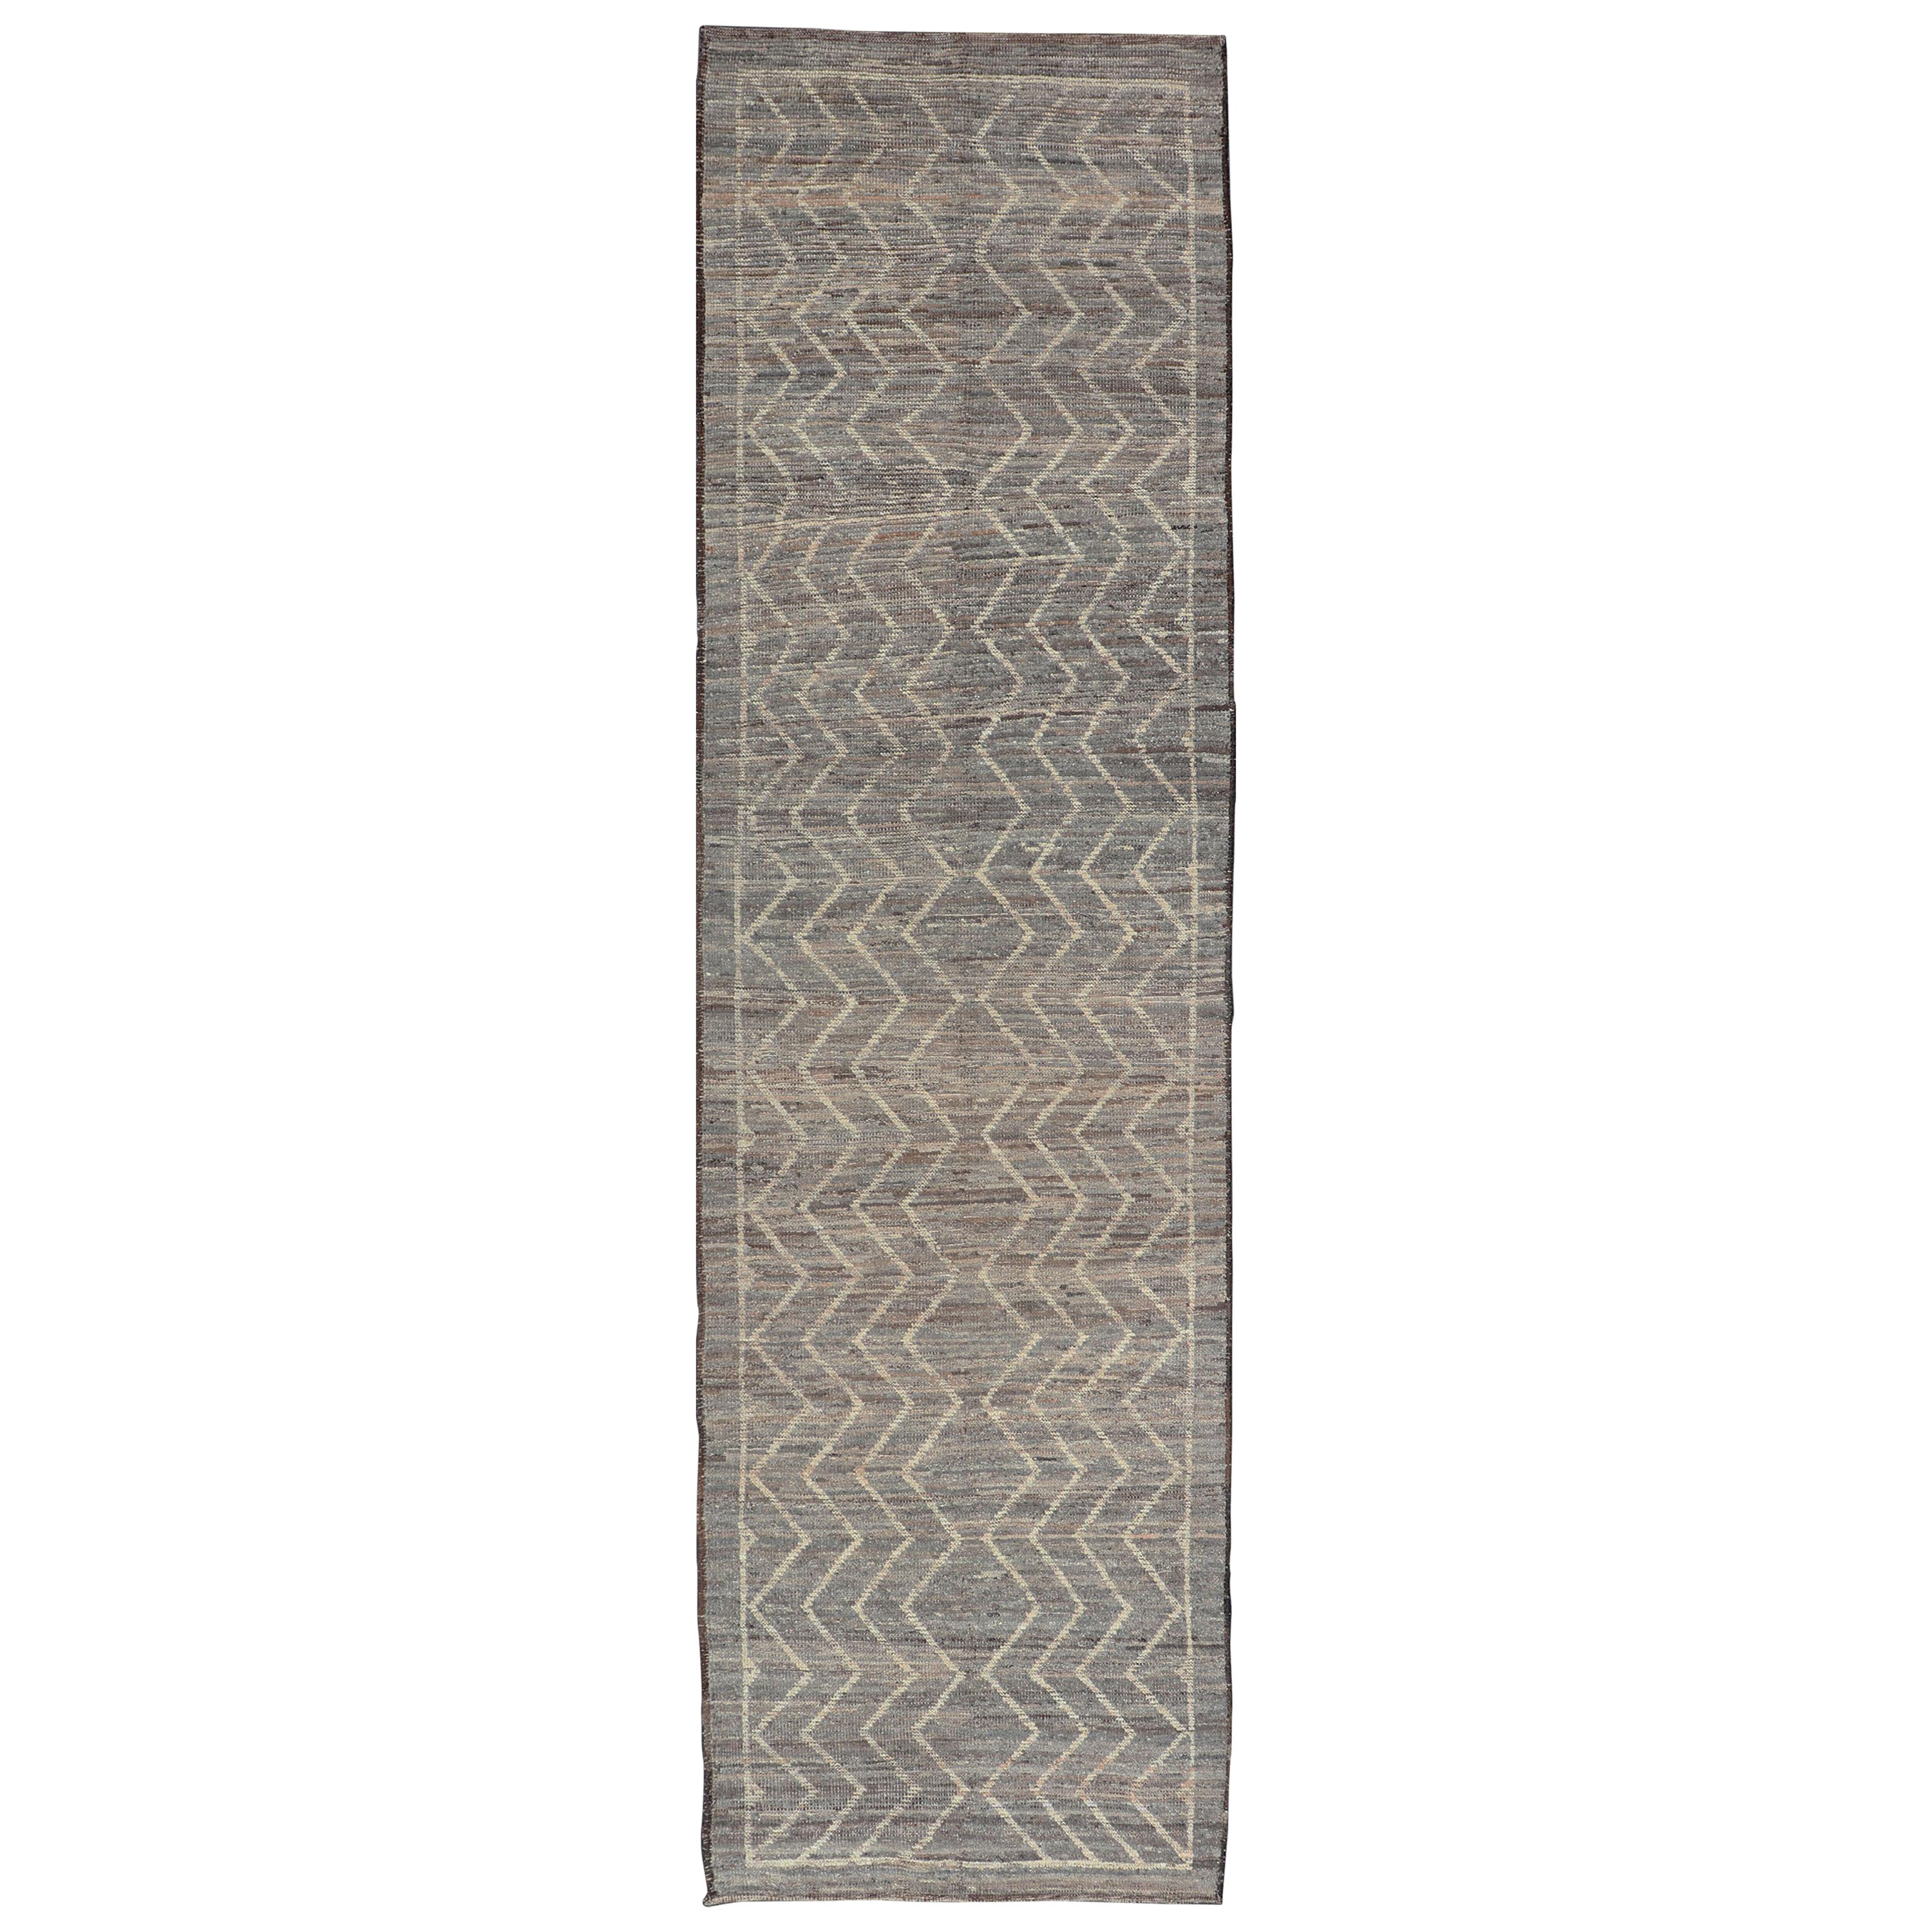 Modern Rug with Tribal Design in Light Gray, Taupe, Cream, and Natural Colors For Sale